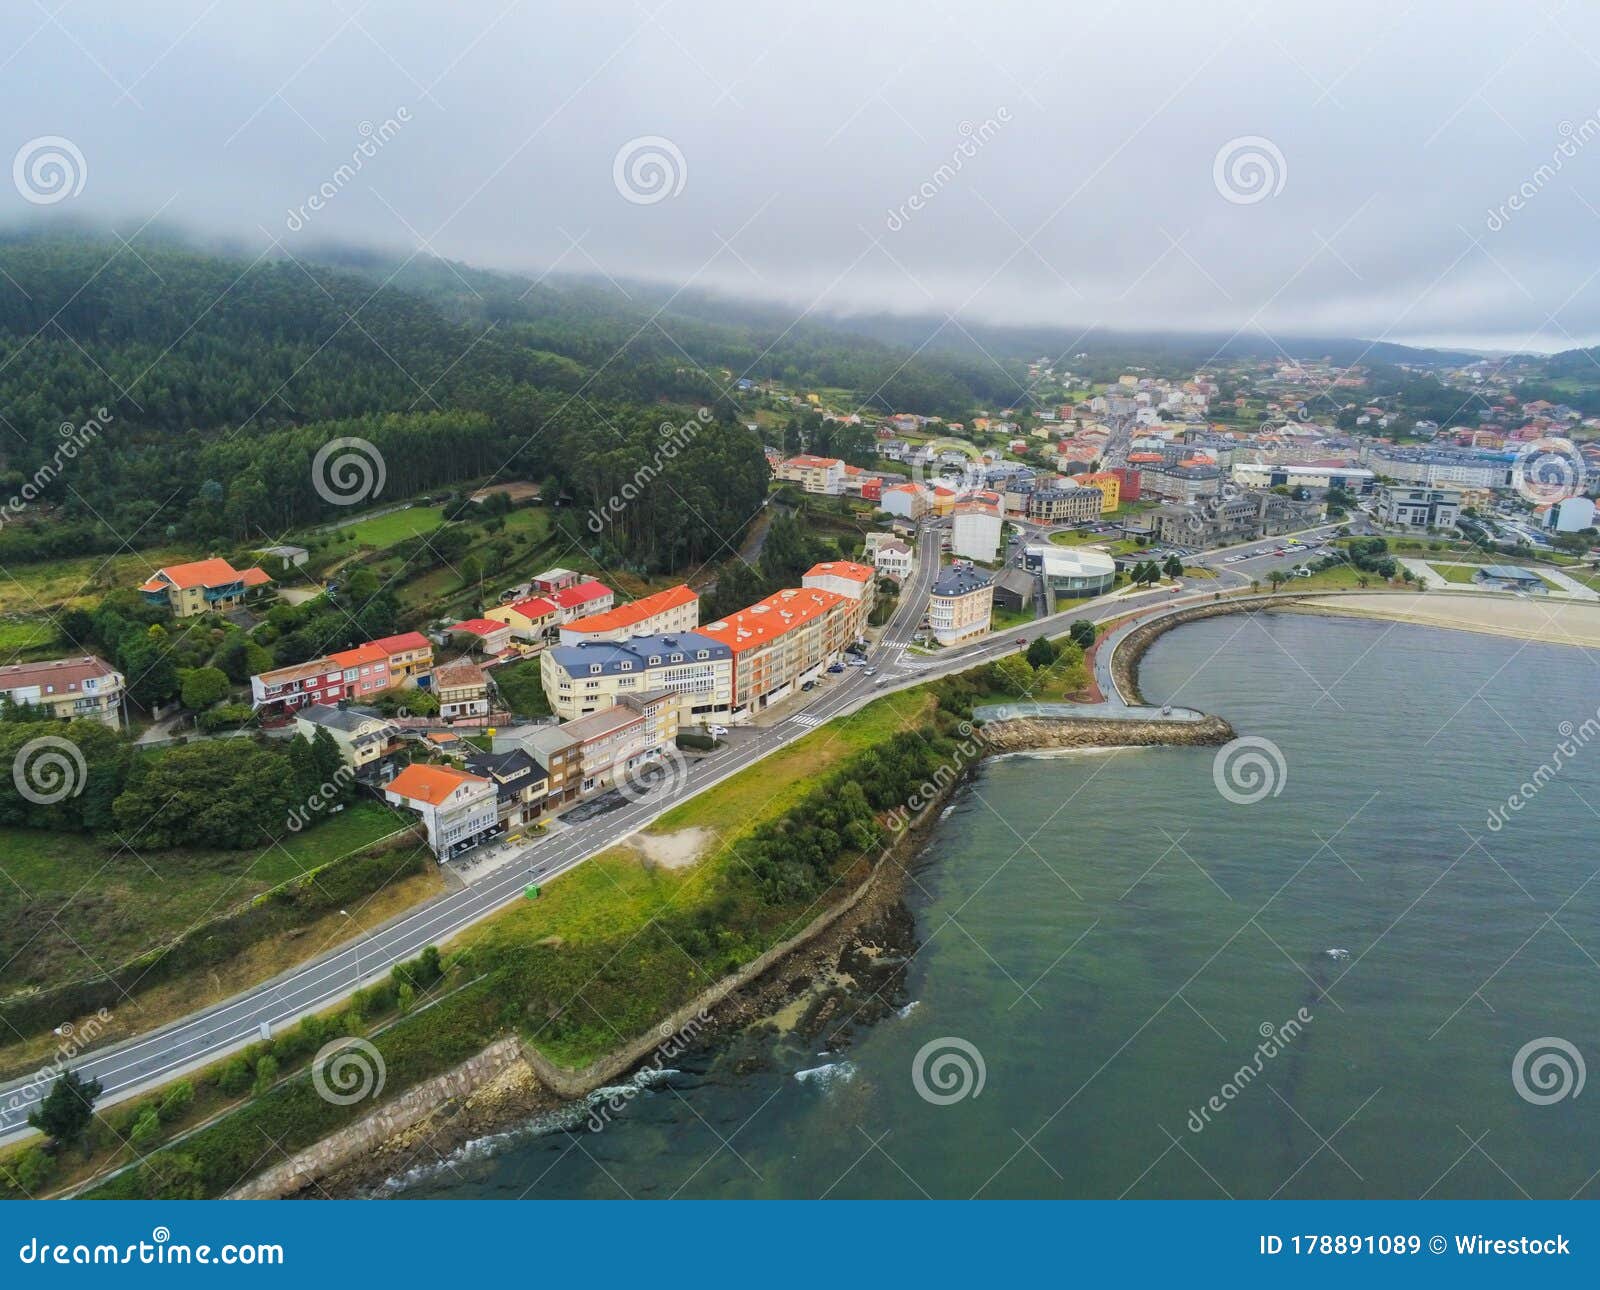 aerial shot of building near the mountain under a cloudy sky in galicia, spain